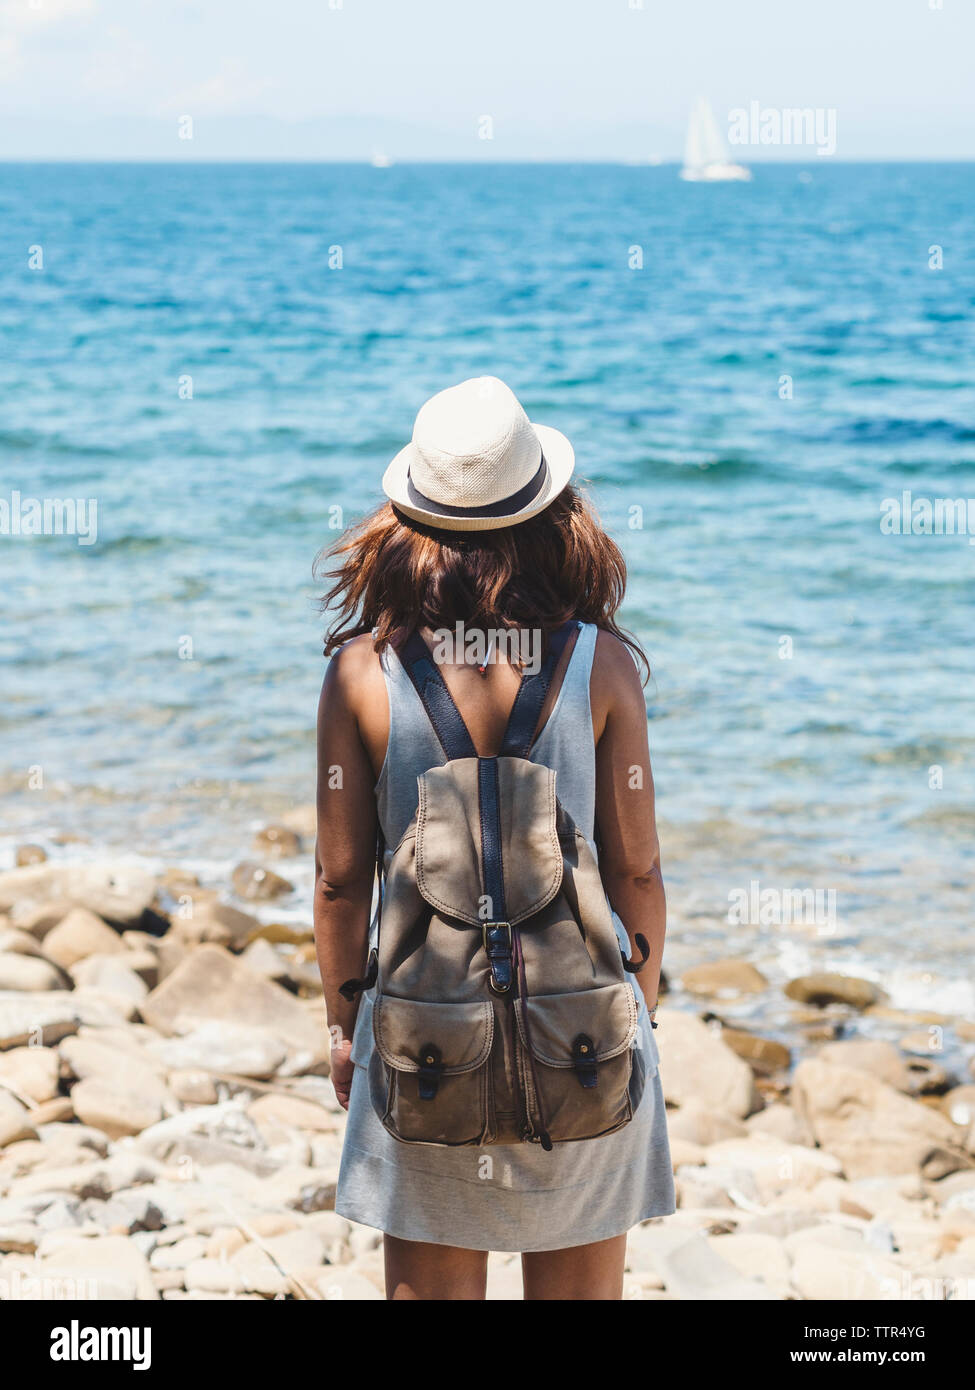 Rear view of woman with backpack looking at view while standing on rocky beach against sky during sunny day Stock Photo